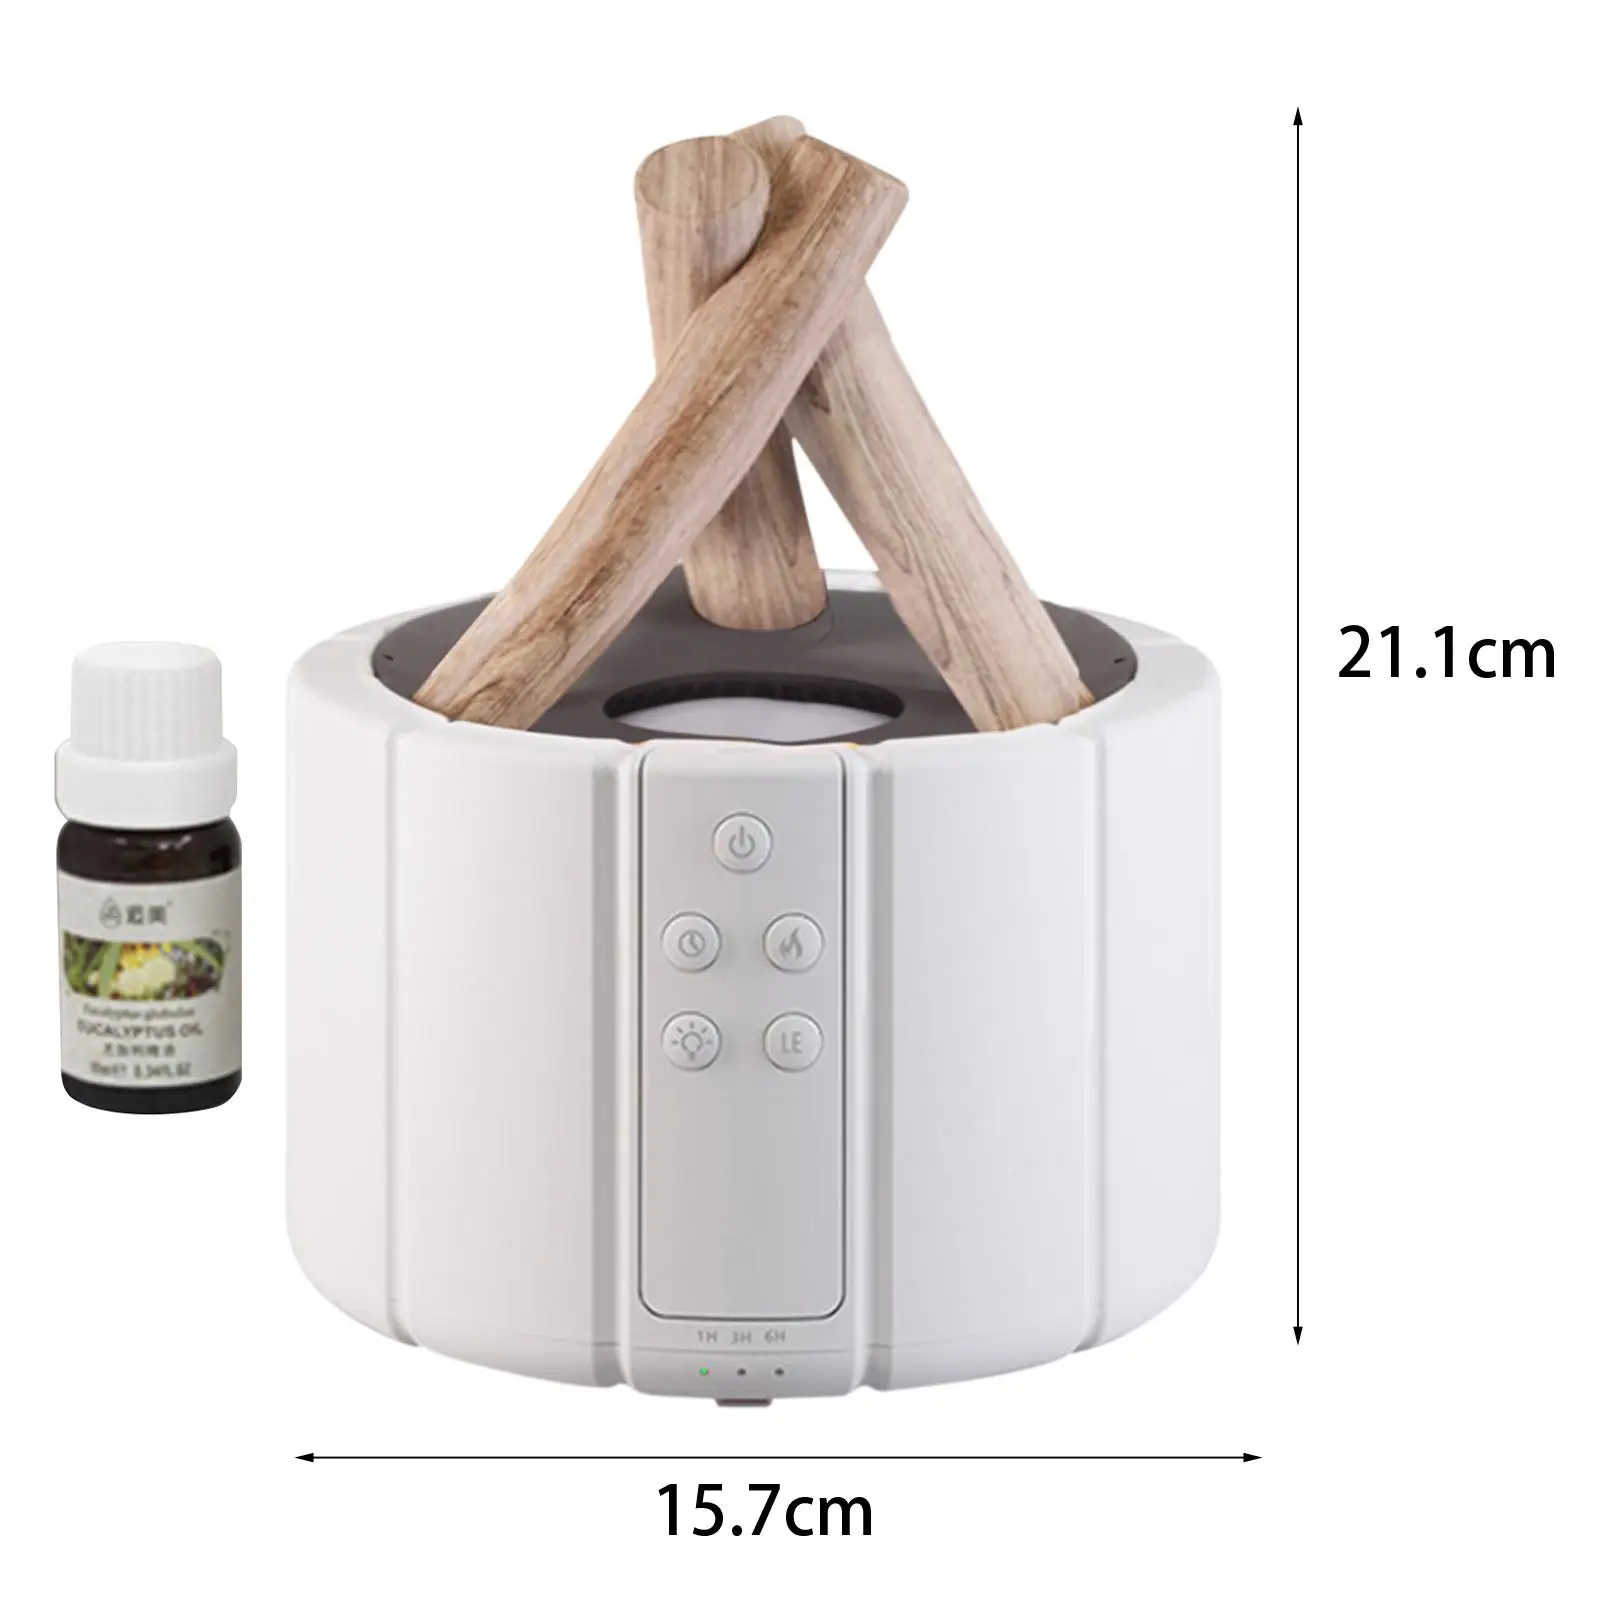 Flame Aroma Diffuser Gift Quiet Realistic Flame Effect Air Purifier 250ml Air Humidifier for SPA Gym Study Office Decor Bedroom